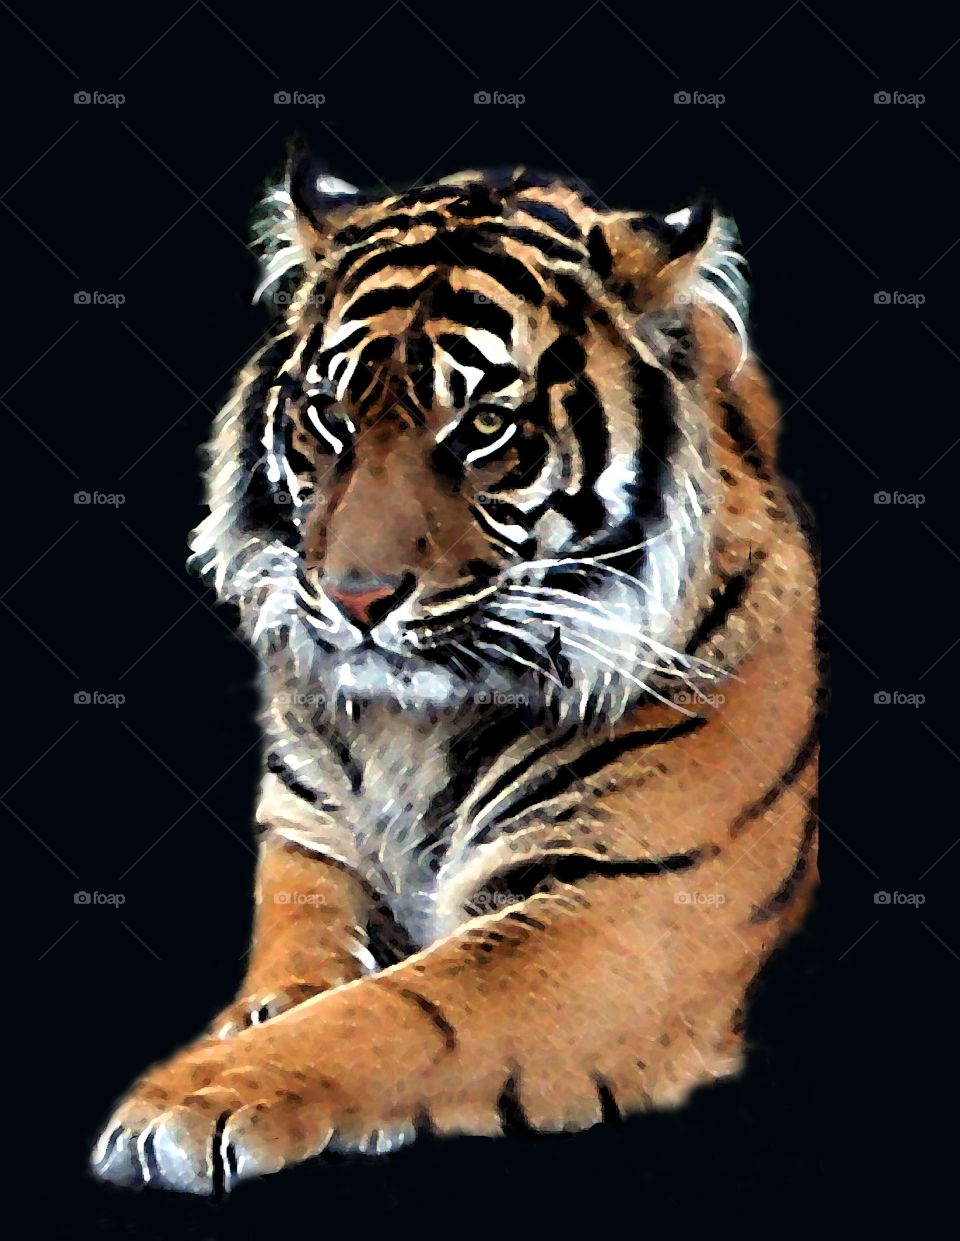 Orange tiger with black stripes and green eyes portrait.  Titles"Tiger in the Night".